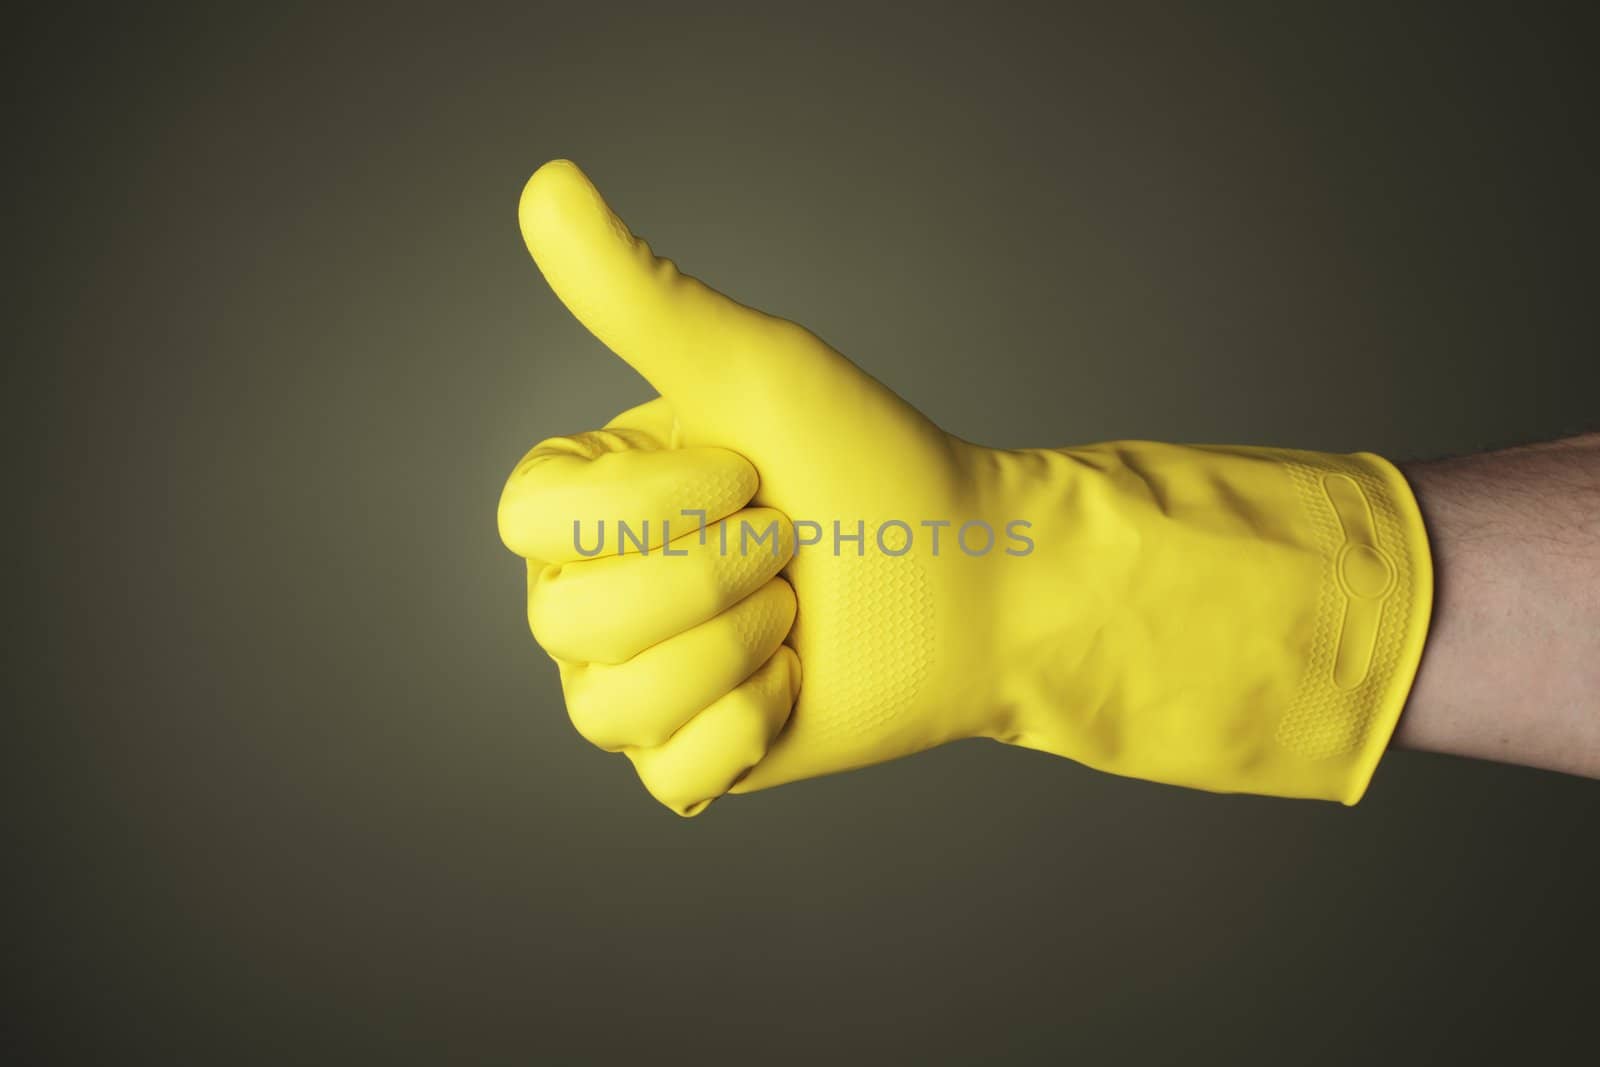 Thumb up! by Stocksnapper